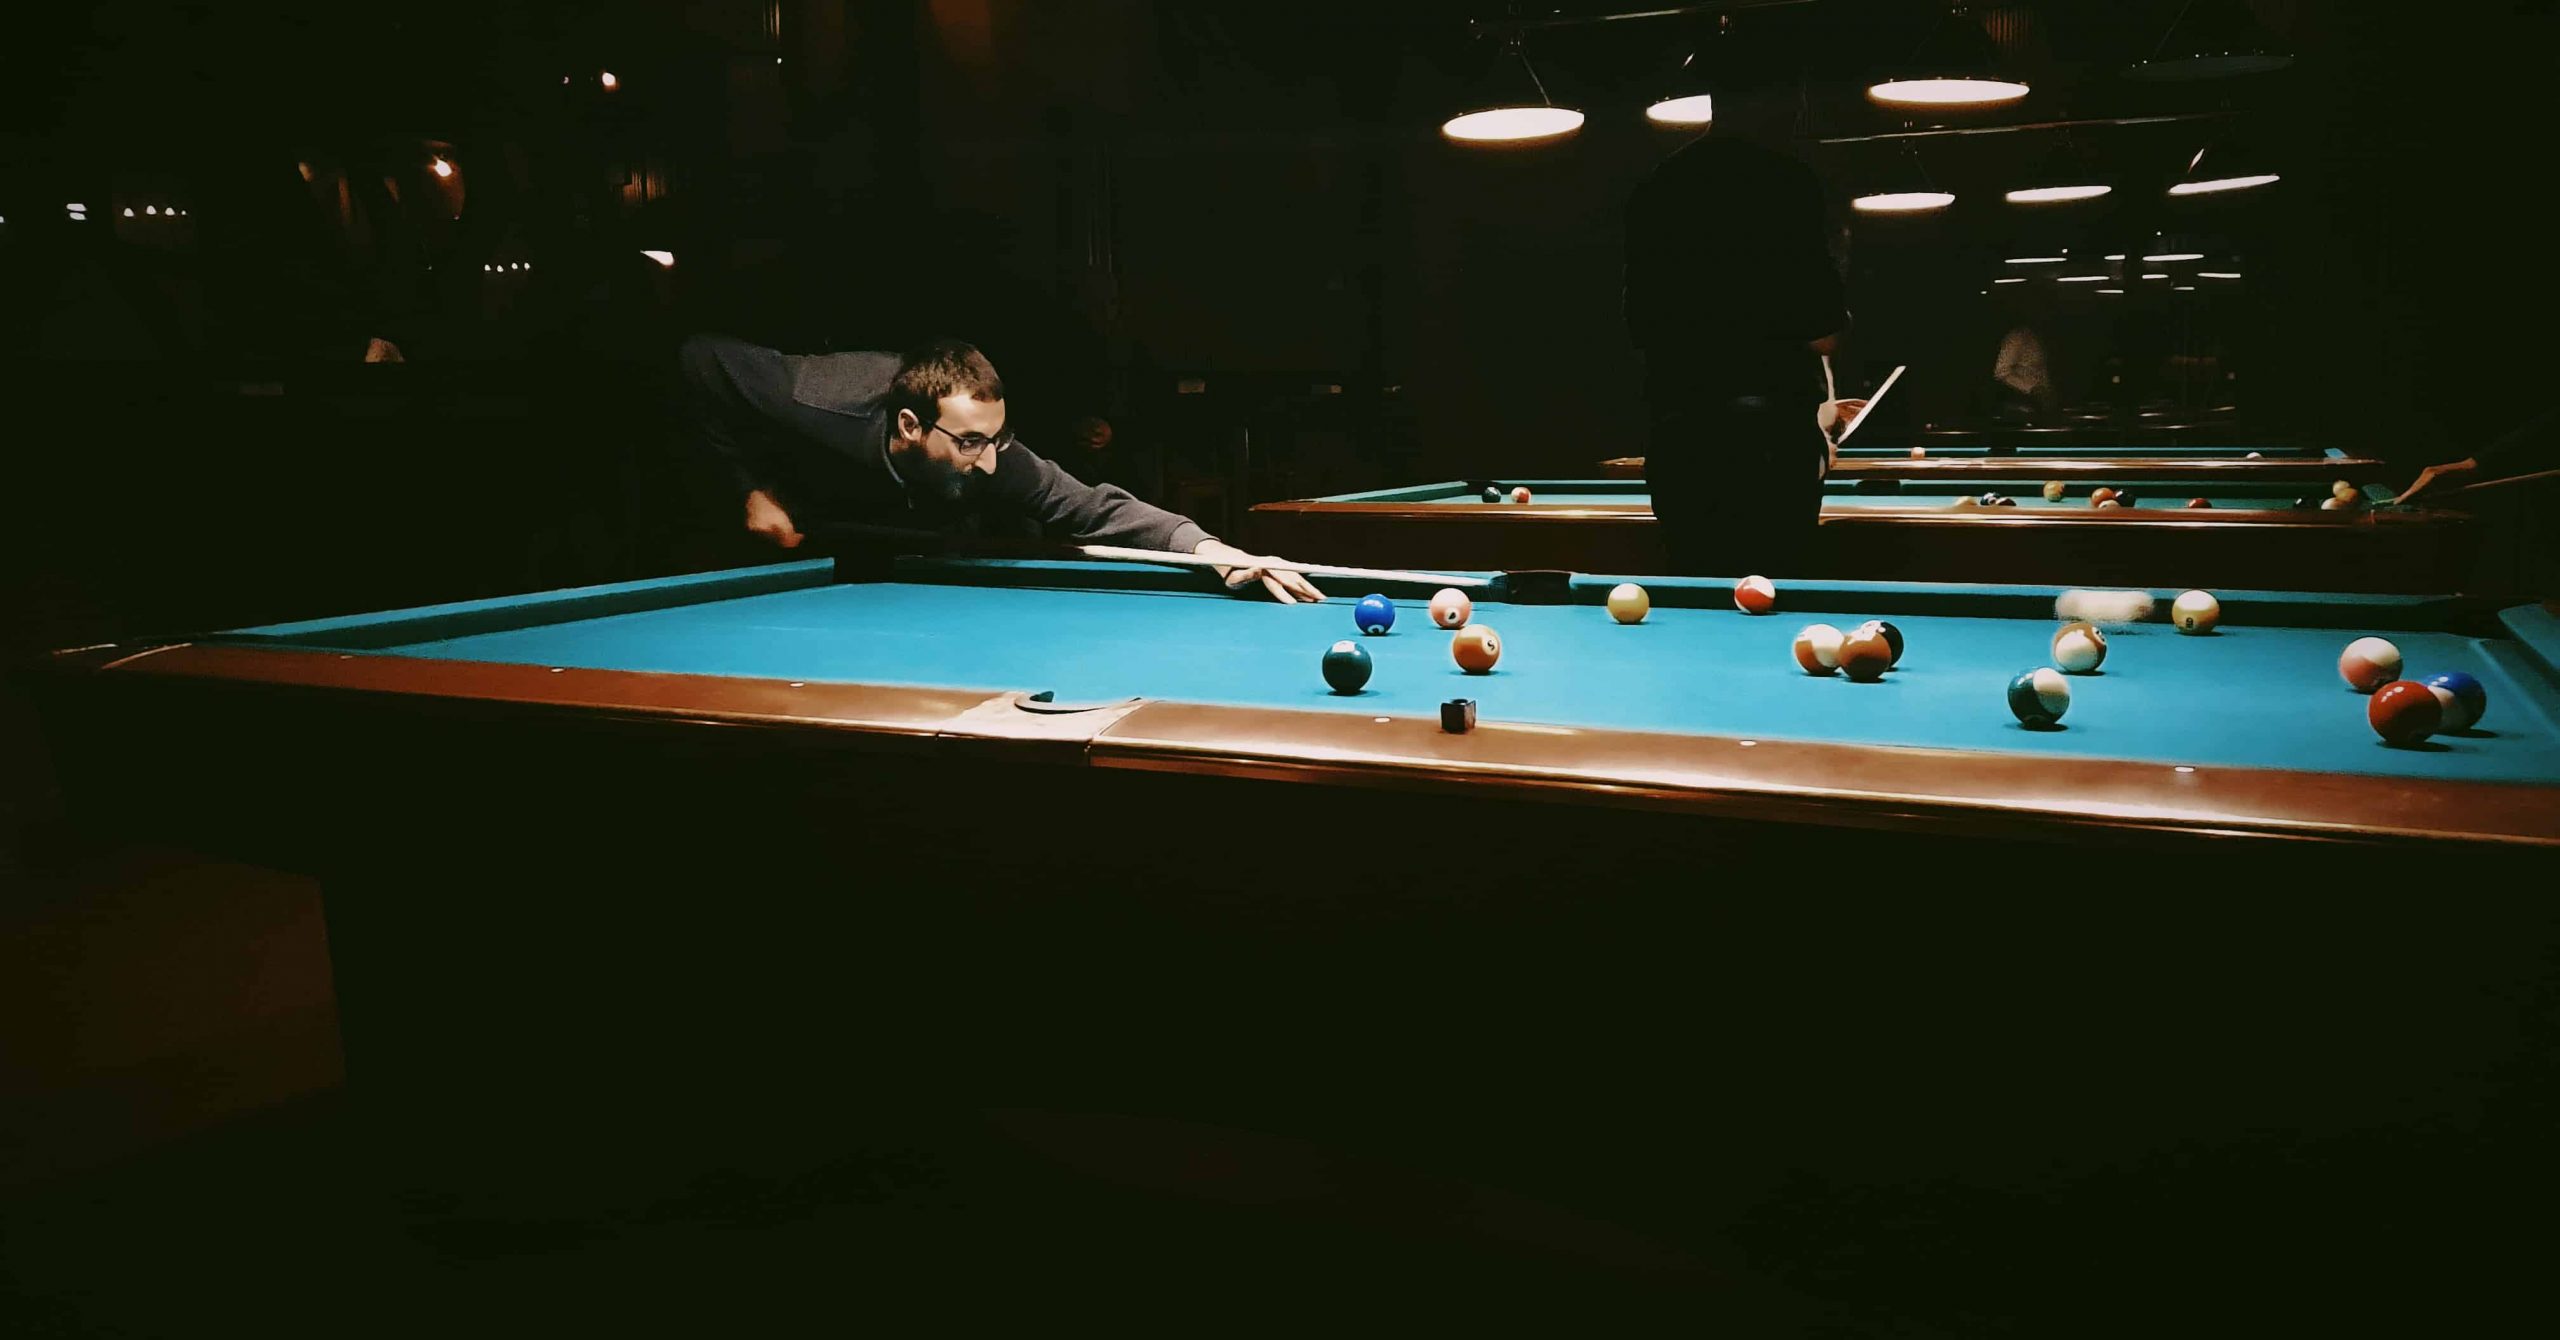 Review of the best under $1000 billiard pool tables